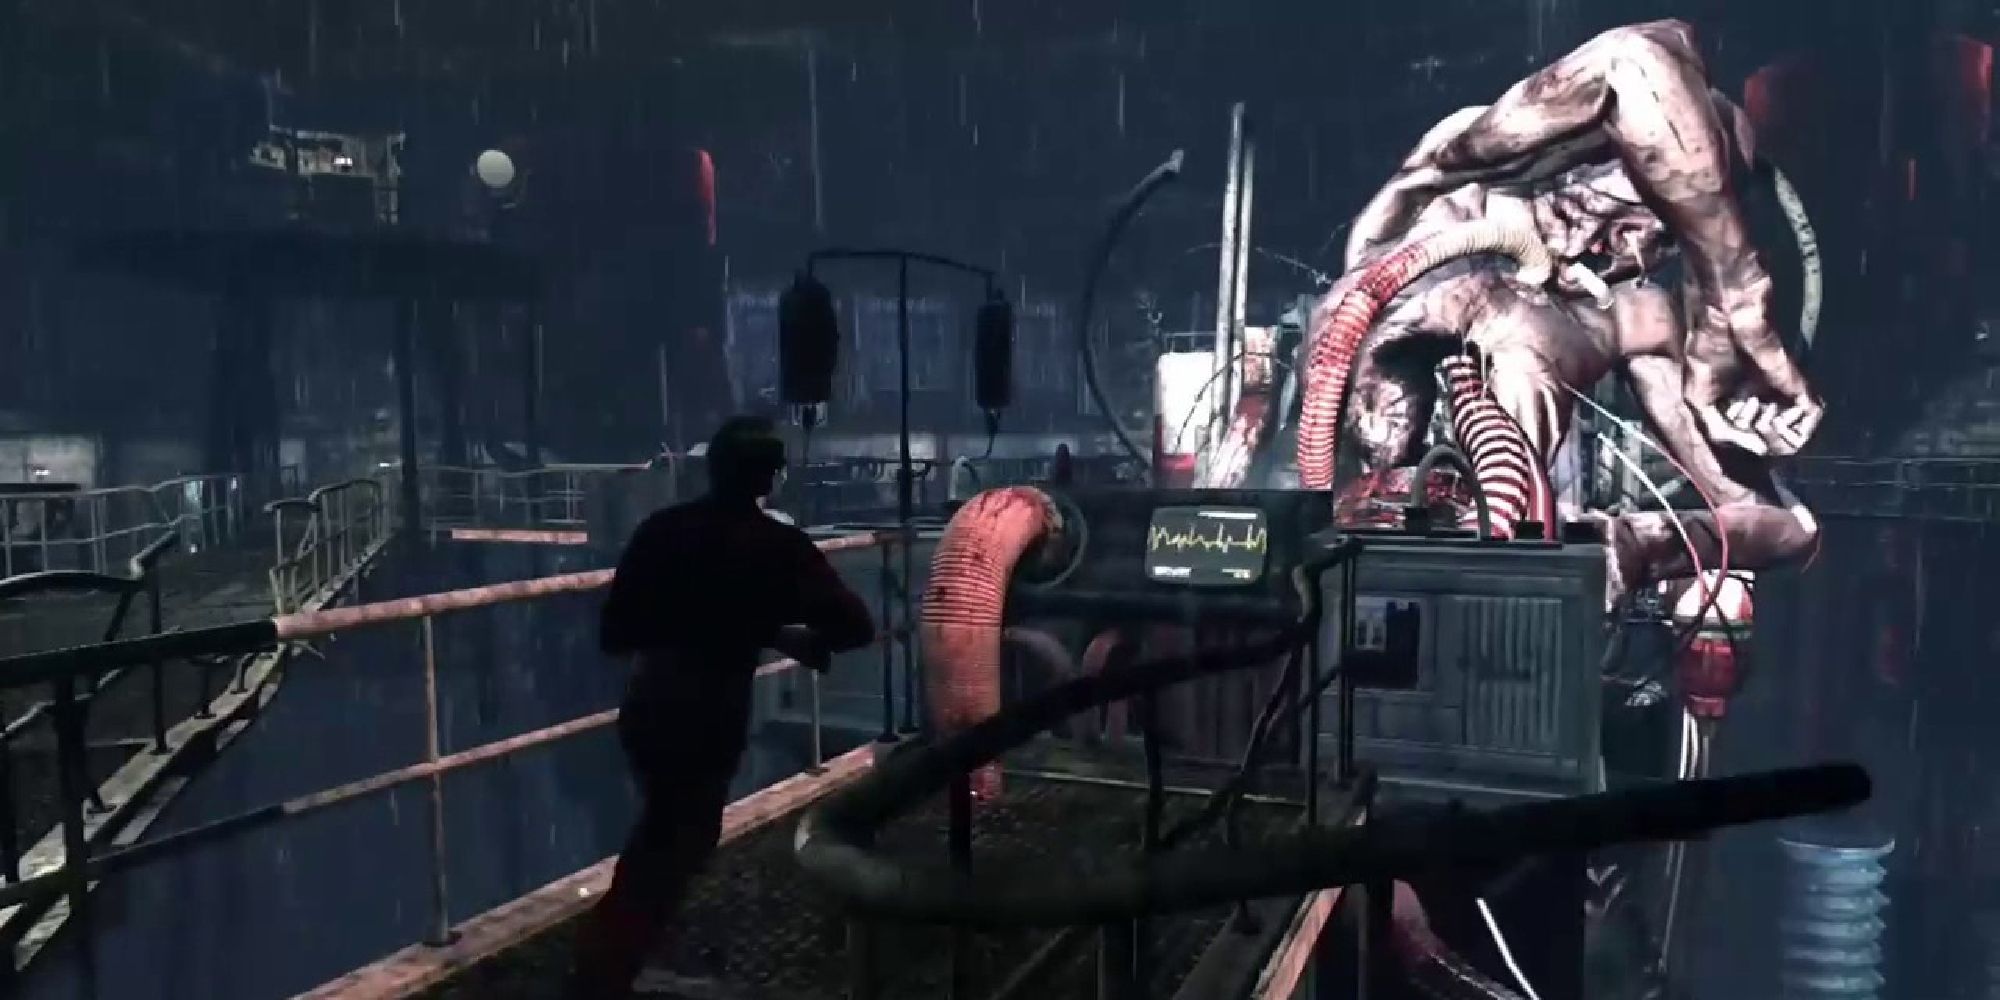 The penultimate boss of Downpour, reeling from an attack with his arm covering his face.